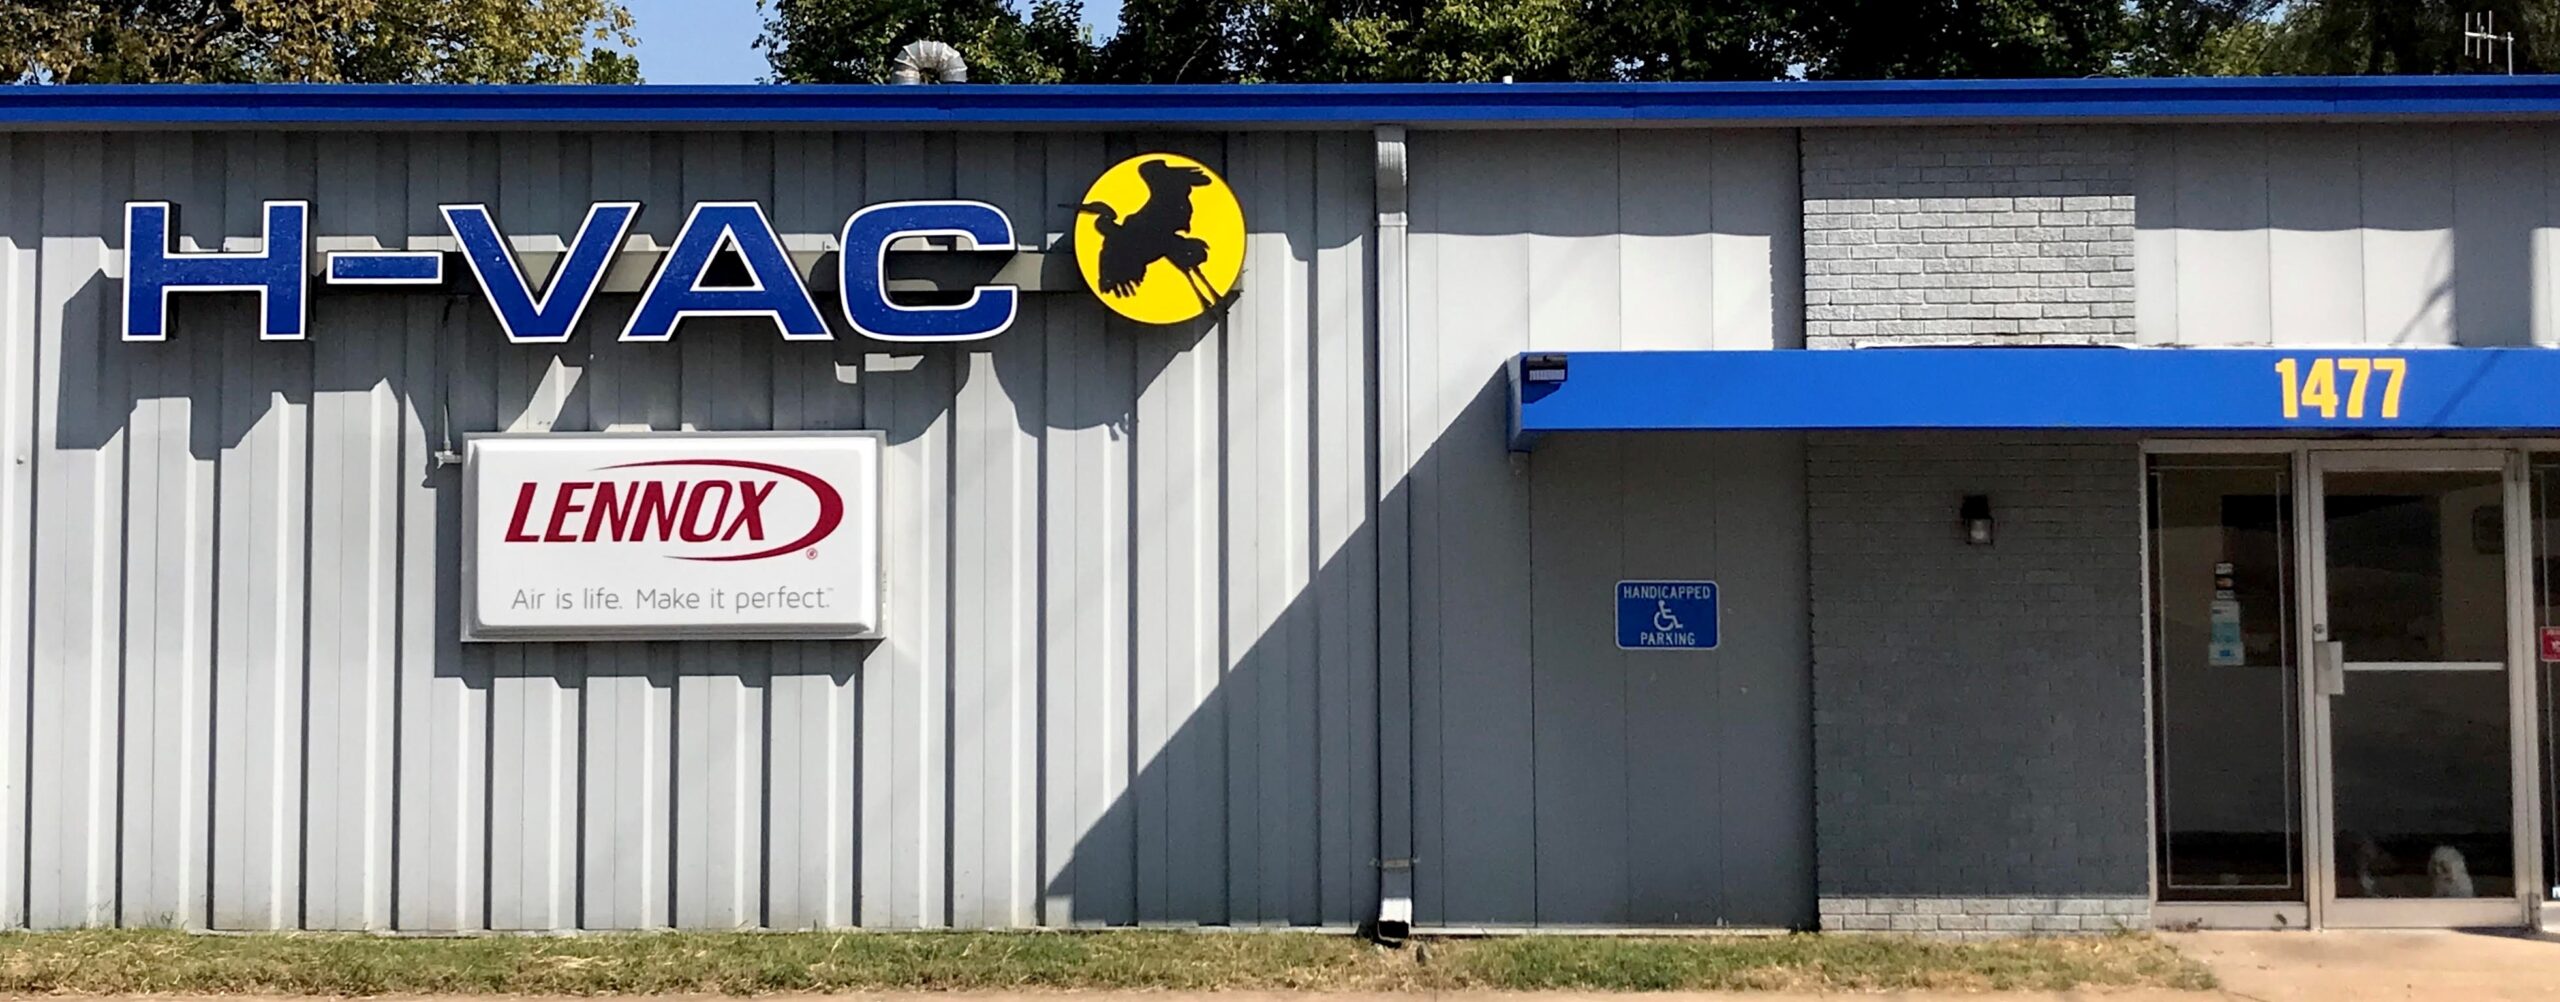 H-Vac and Central Plumbing located in Springfield, MO